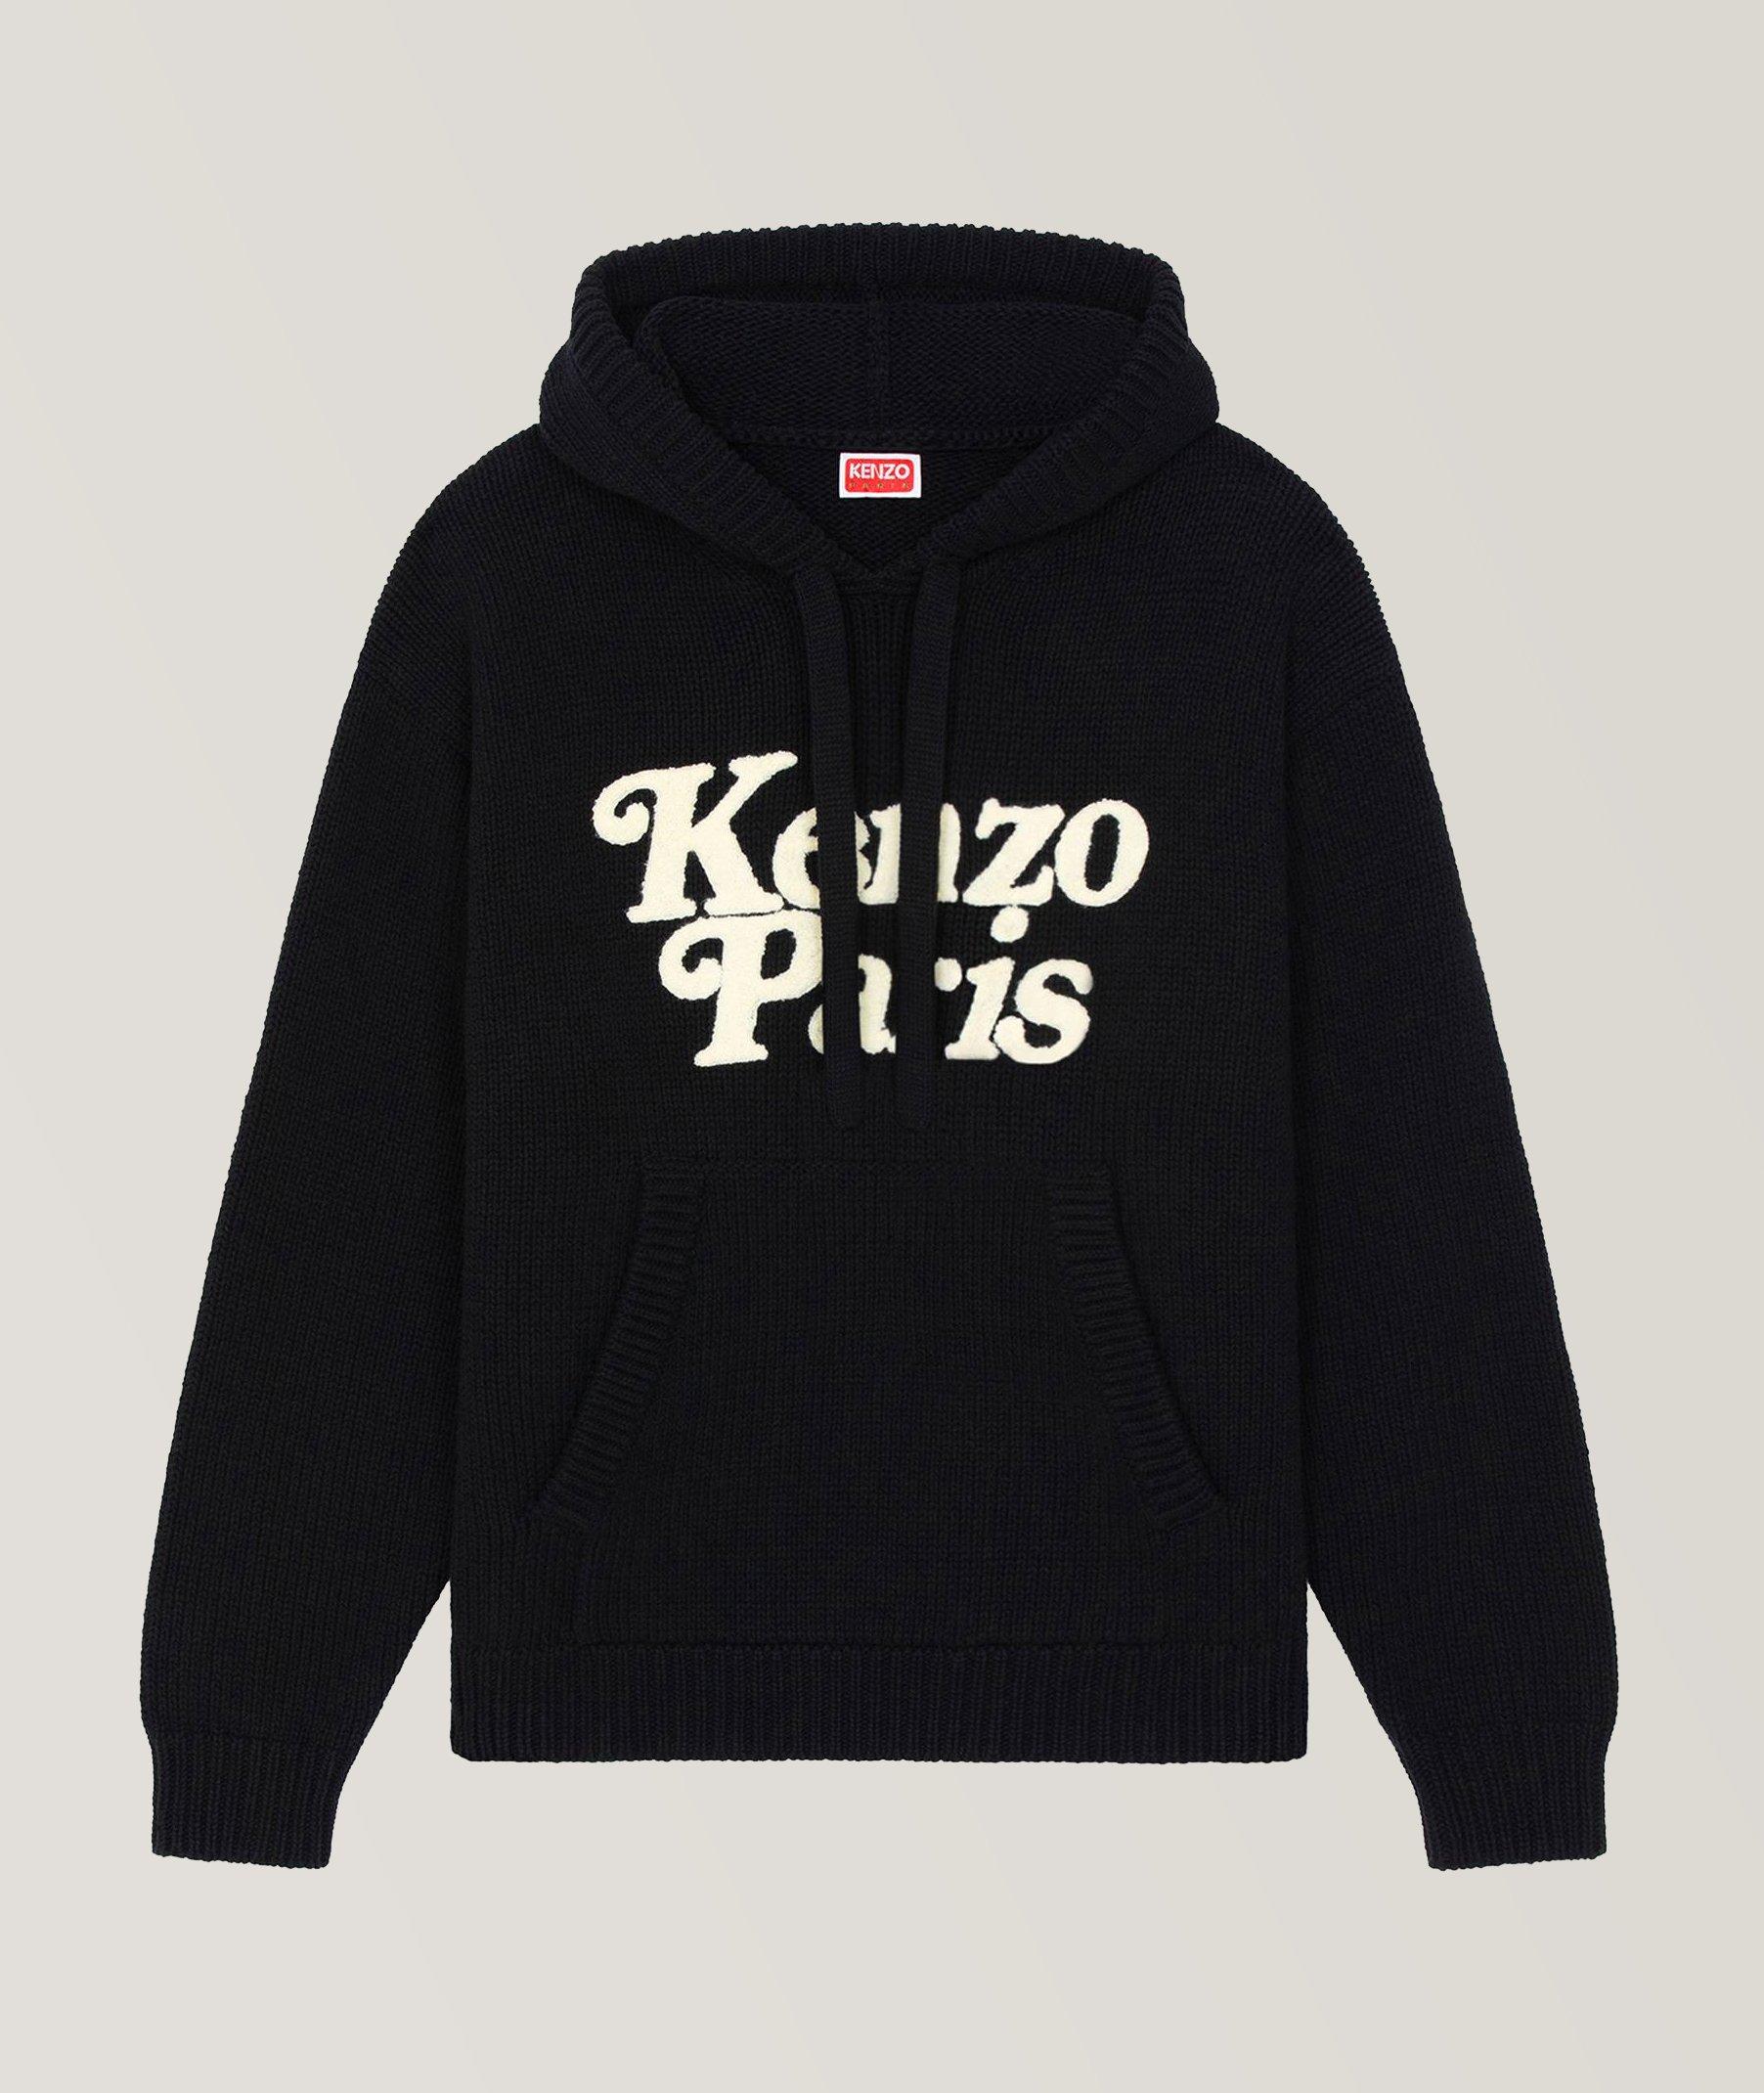 Verdy Collaboration Printed Logo Cotton Hooded Sweater image 0